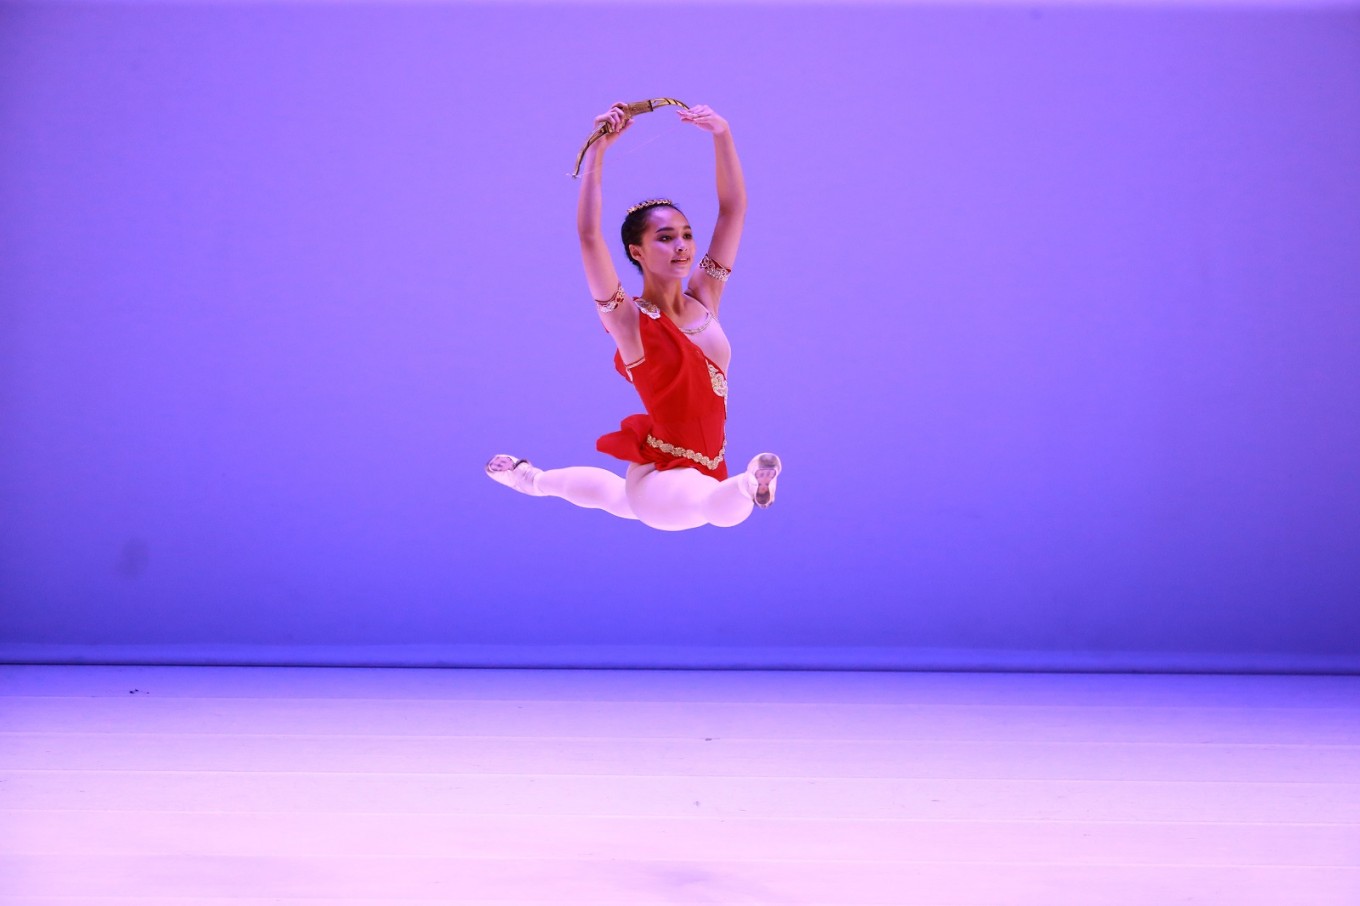 Fifteen-year-old Shalama Qowlam Fadila, who trained at The Ballet Academy at Casagaya, Jakarta, won second place in the Junior Ballet Solo category at the Taiwan Grand Prix International Ballet Competition in early August. Image: The Jakarta Post